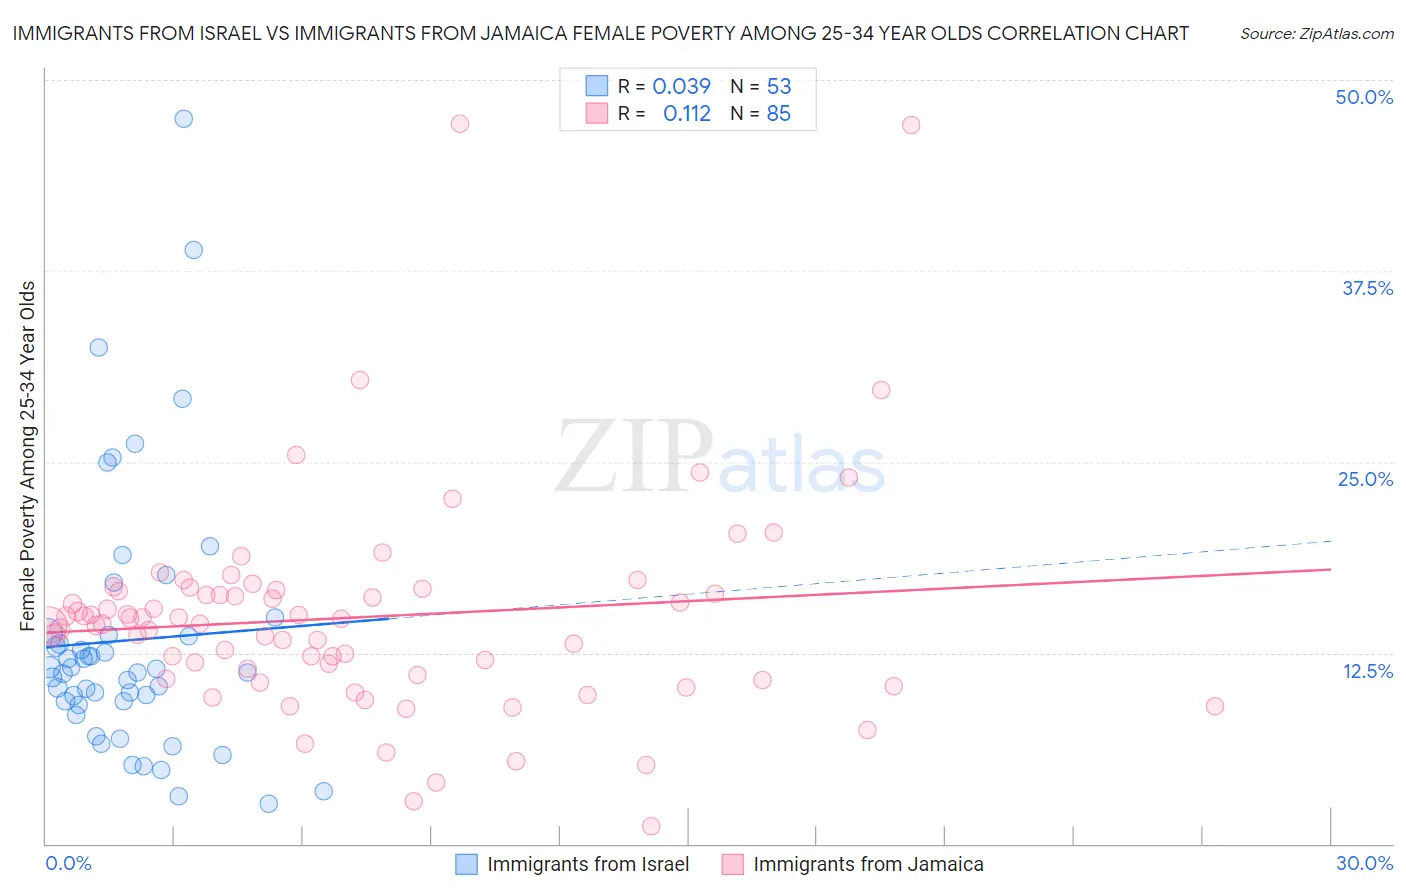 Immigrants from Israel vs Immigrants from Jamaica Female Poverty Among 25-34 Year Olds